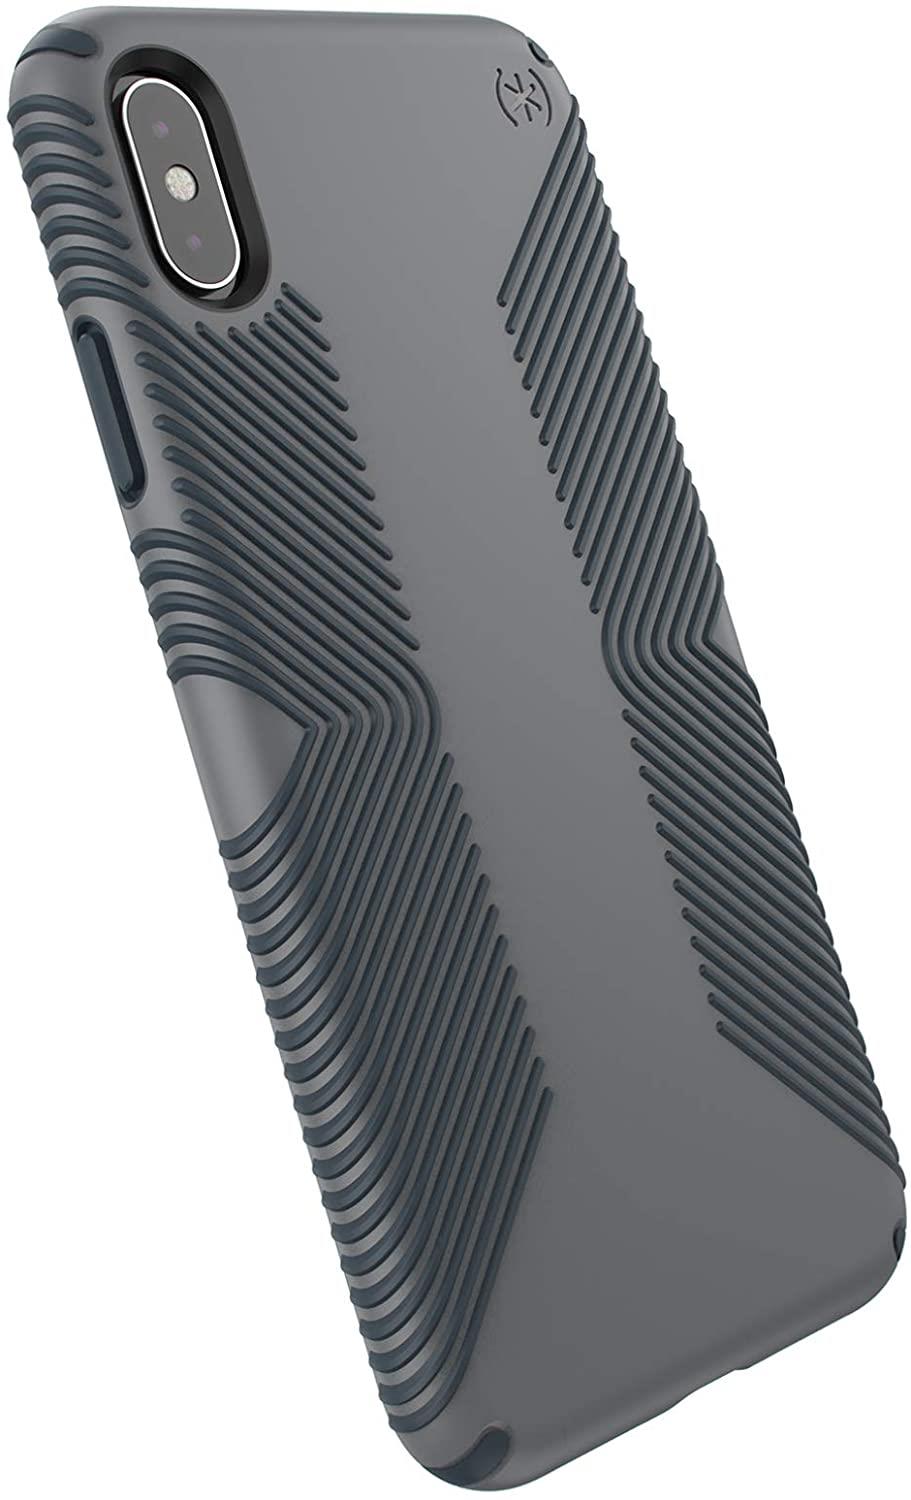 Speck Products Presidio Grip iPhone Xs Max Case, Graphite Grey/Charcoal Grey